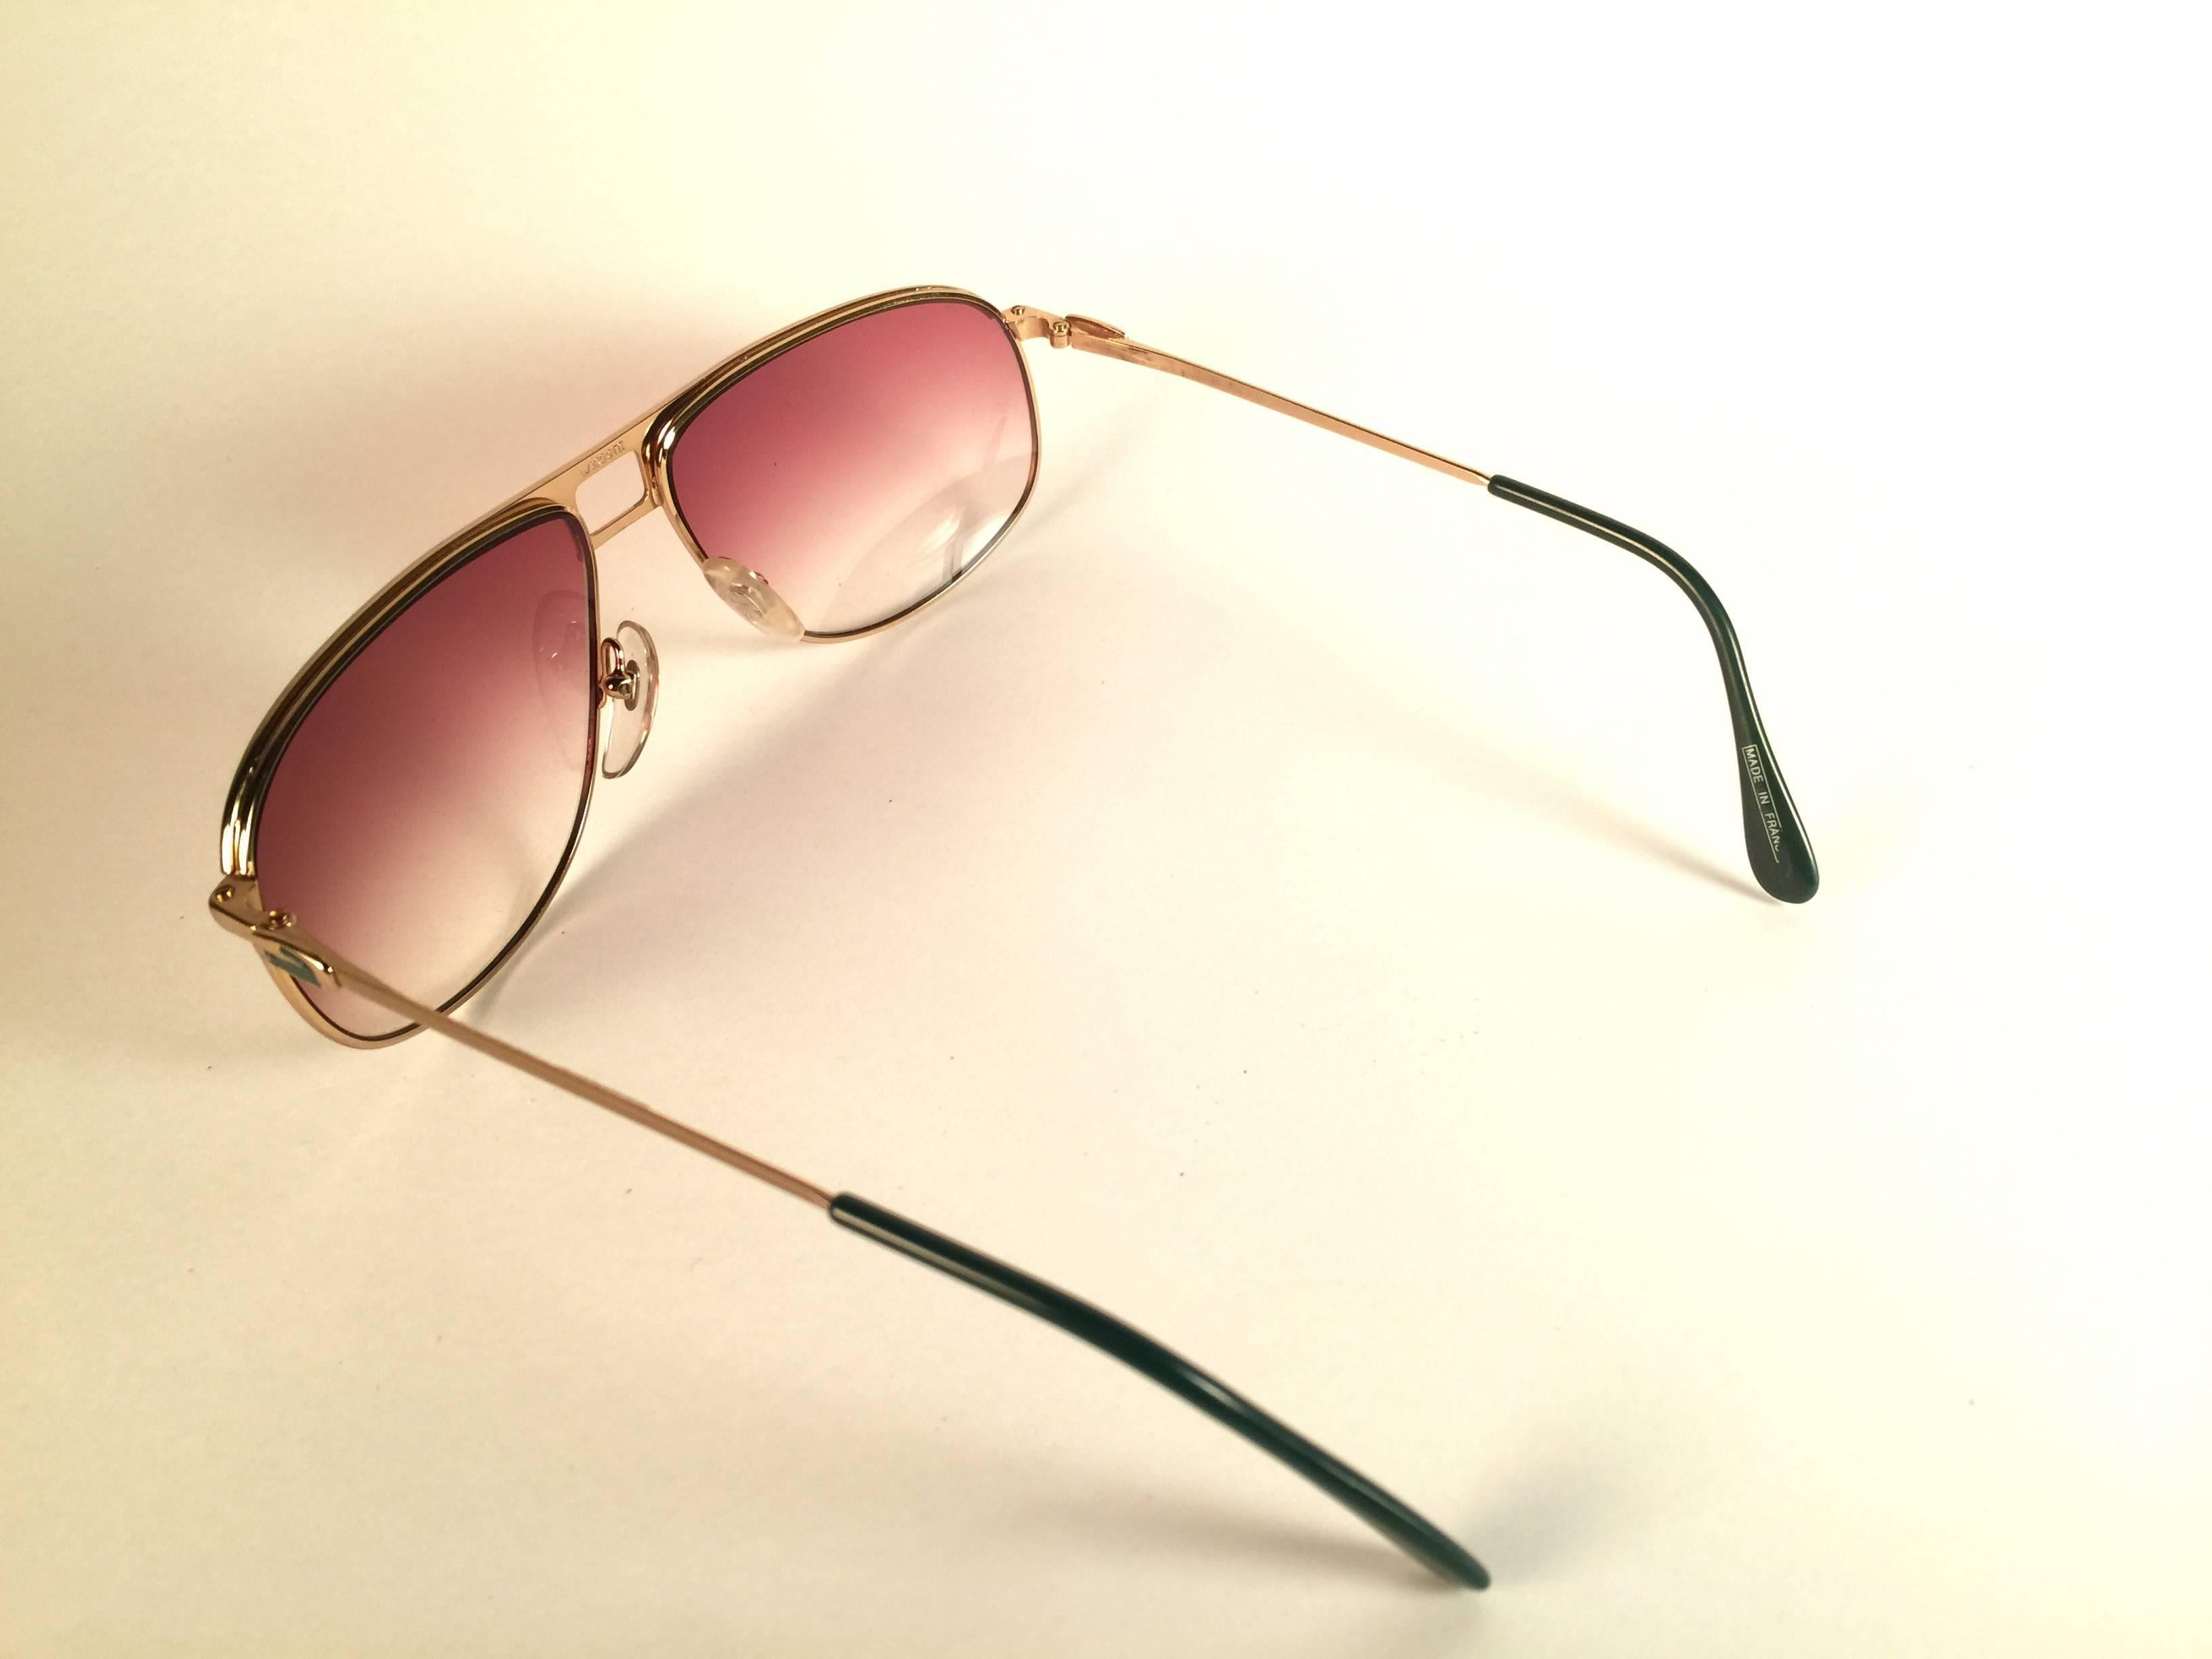 lacoste sunglasses made in france